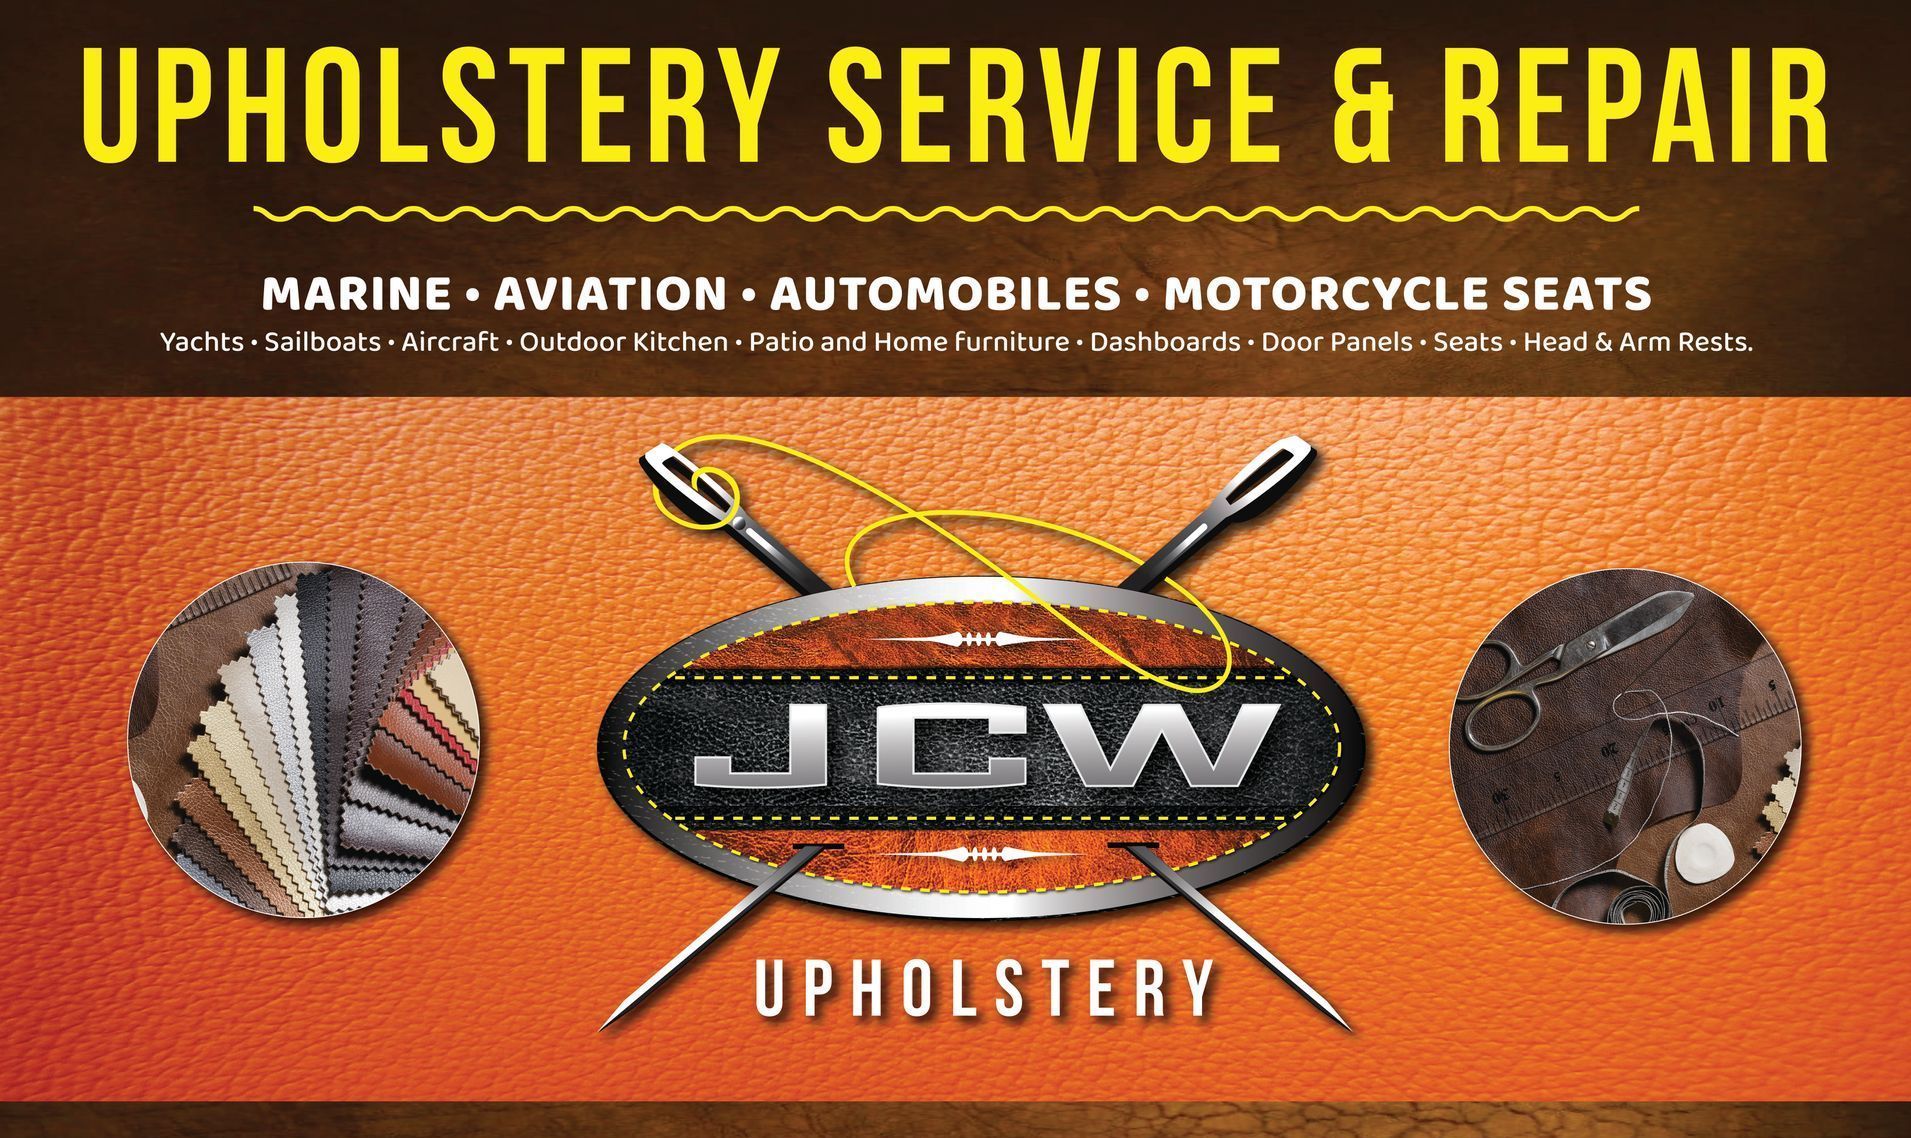 An advertisement for jcw upholstery service and repair